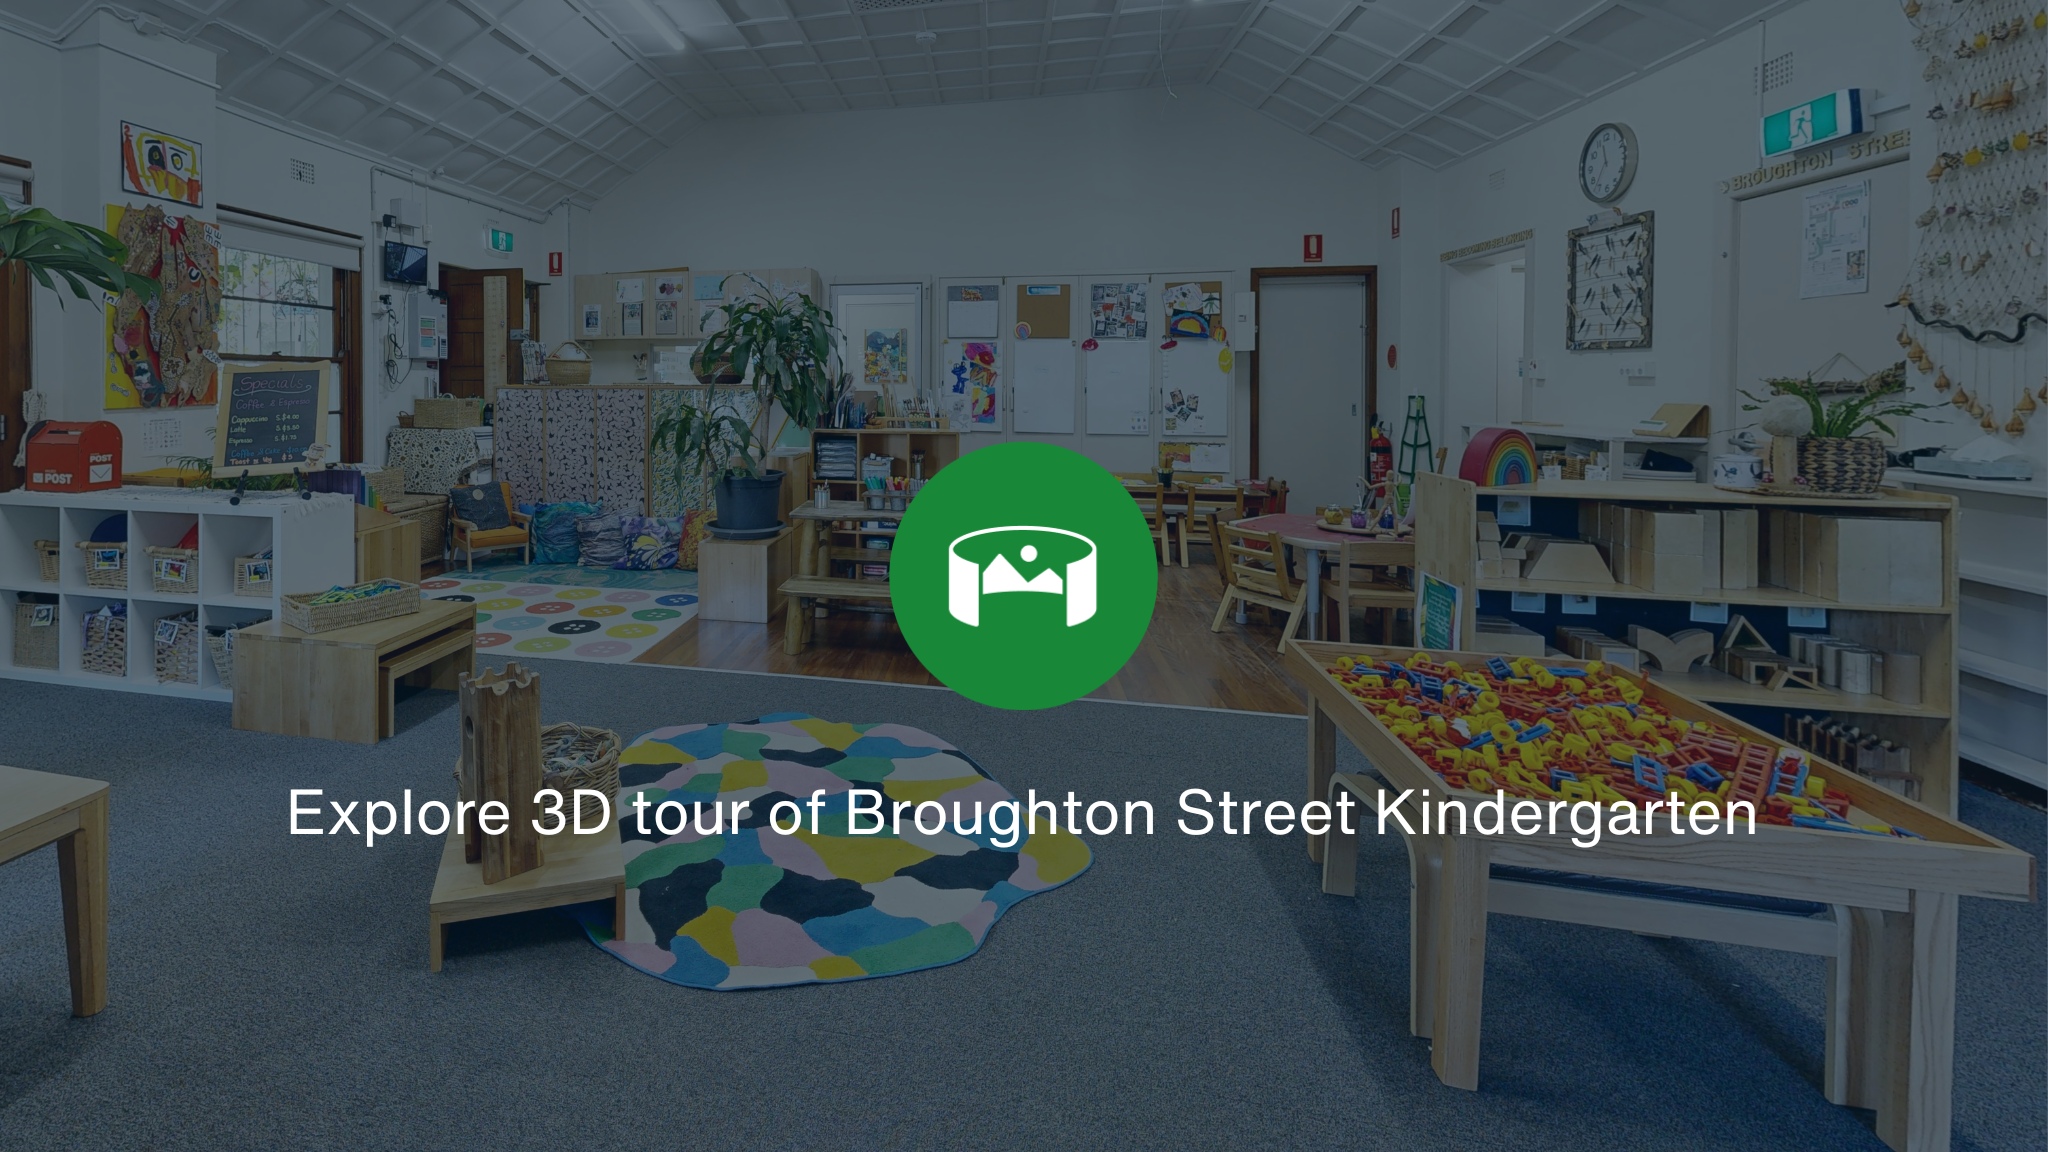 Inside the playroom at Broughton Street Kindergaten overlayed with a green icon and the words Explore 3D tour of Broughton Street Kindergarten.